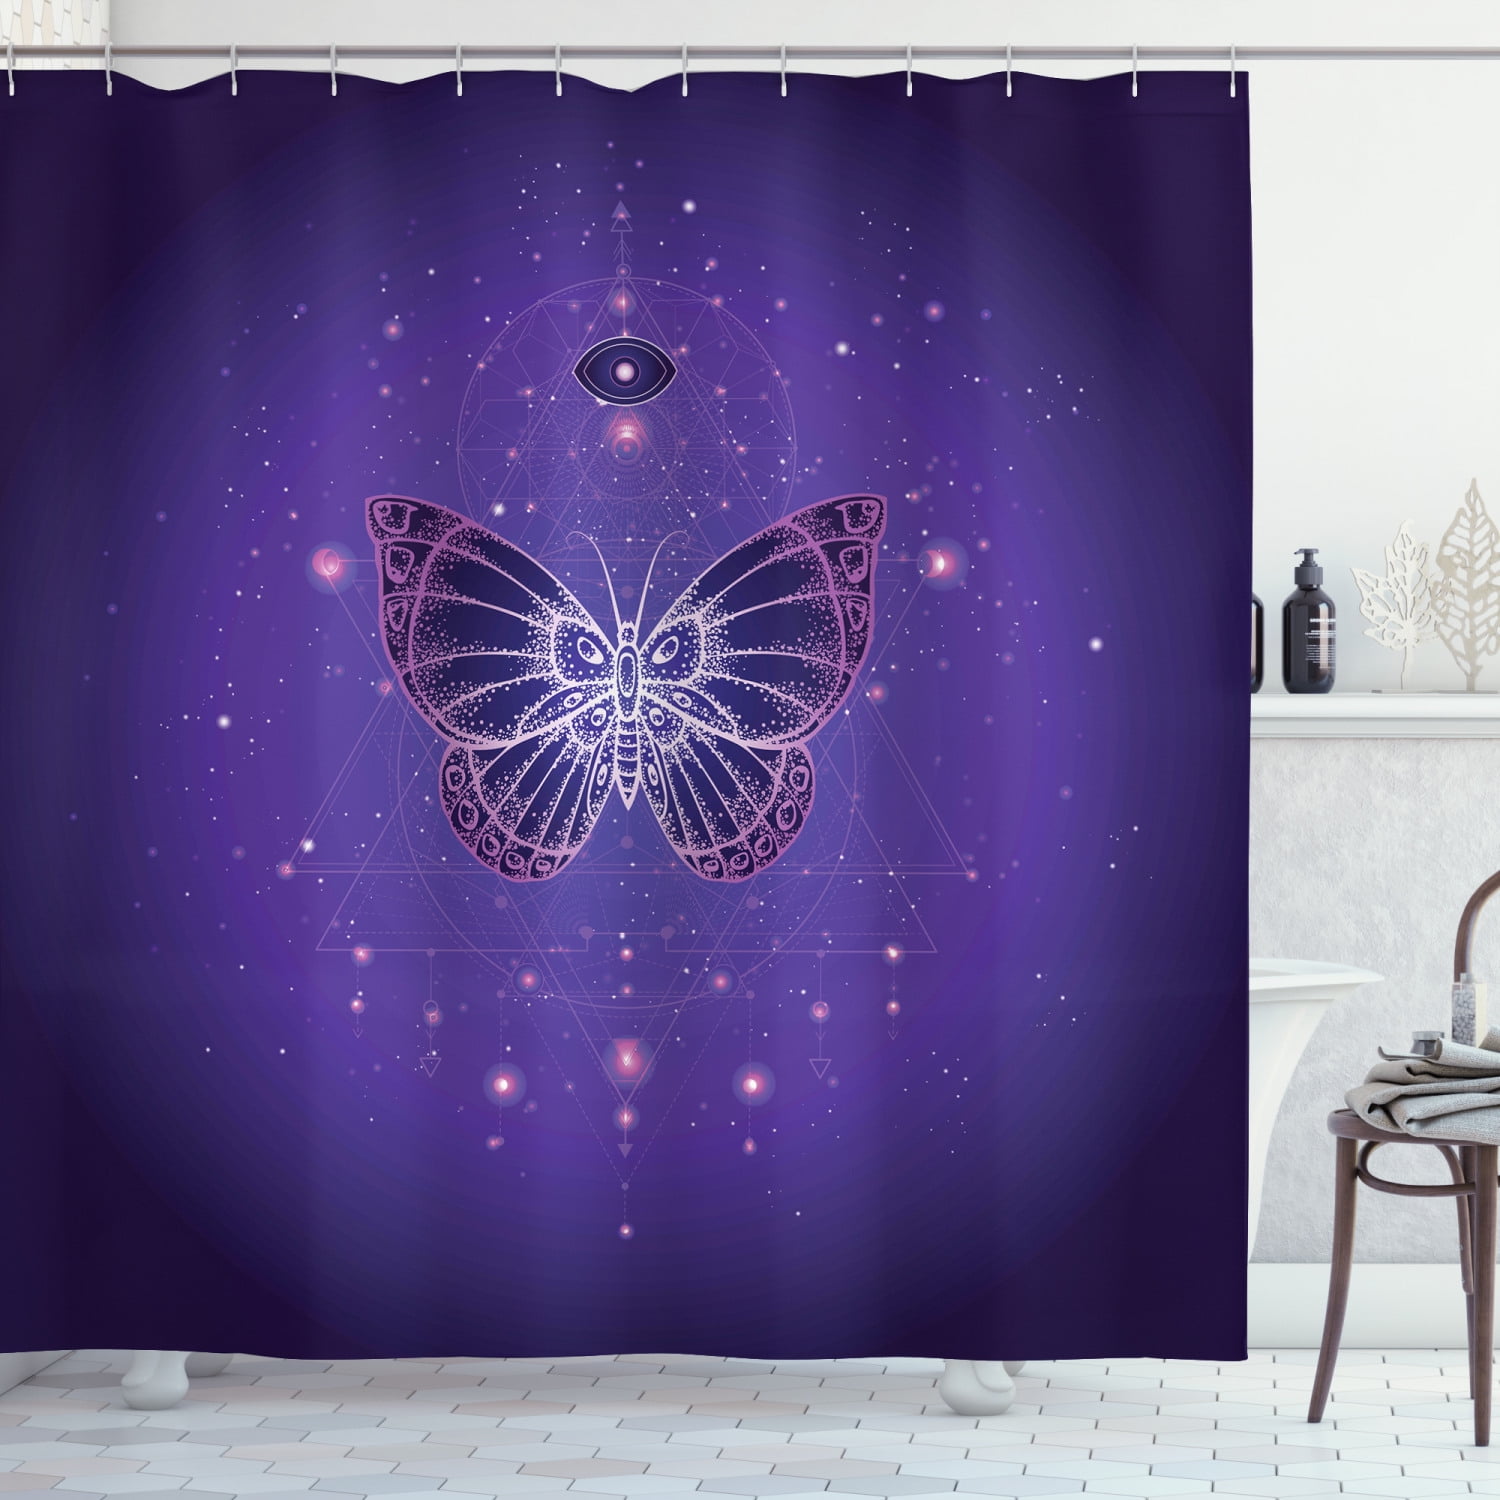 Details about   Colorful Art Butterfly Shower Curtain Waterproof Fabric Bathroom Bath Curtain 